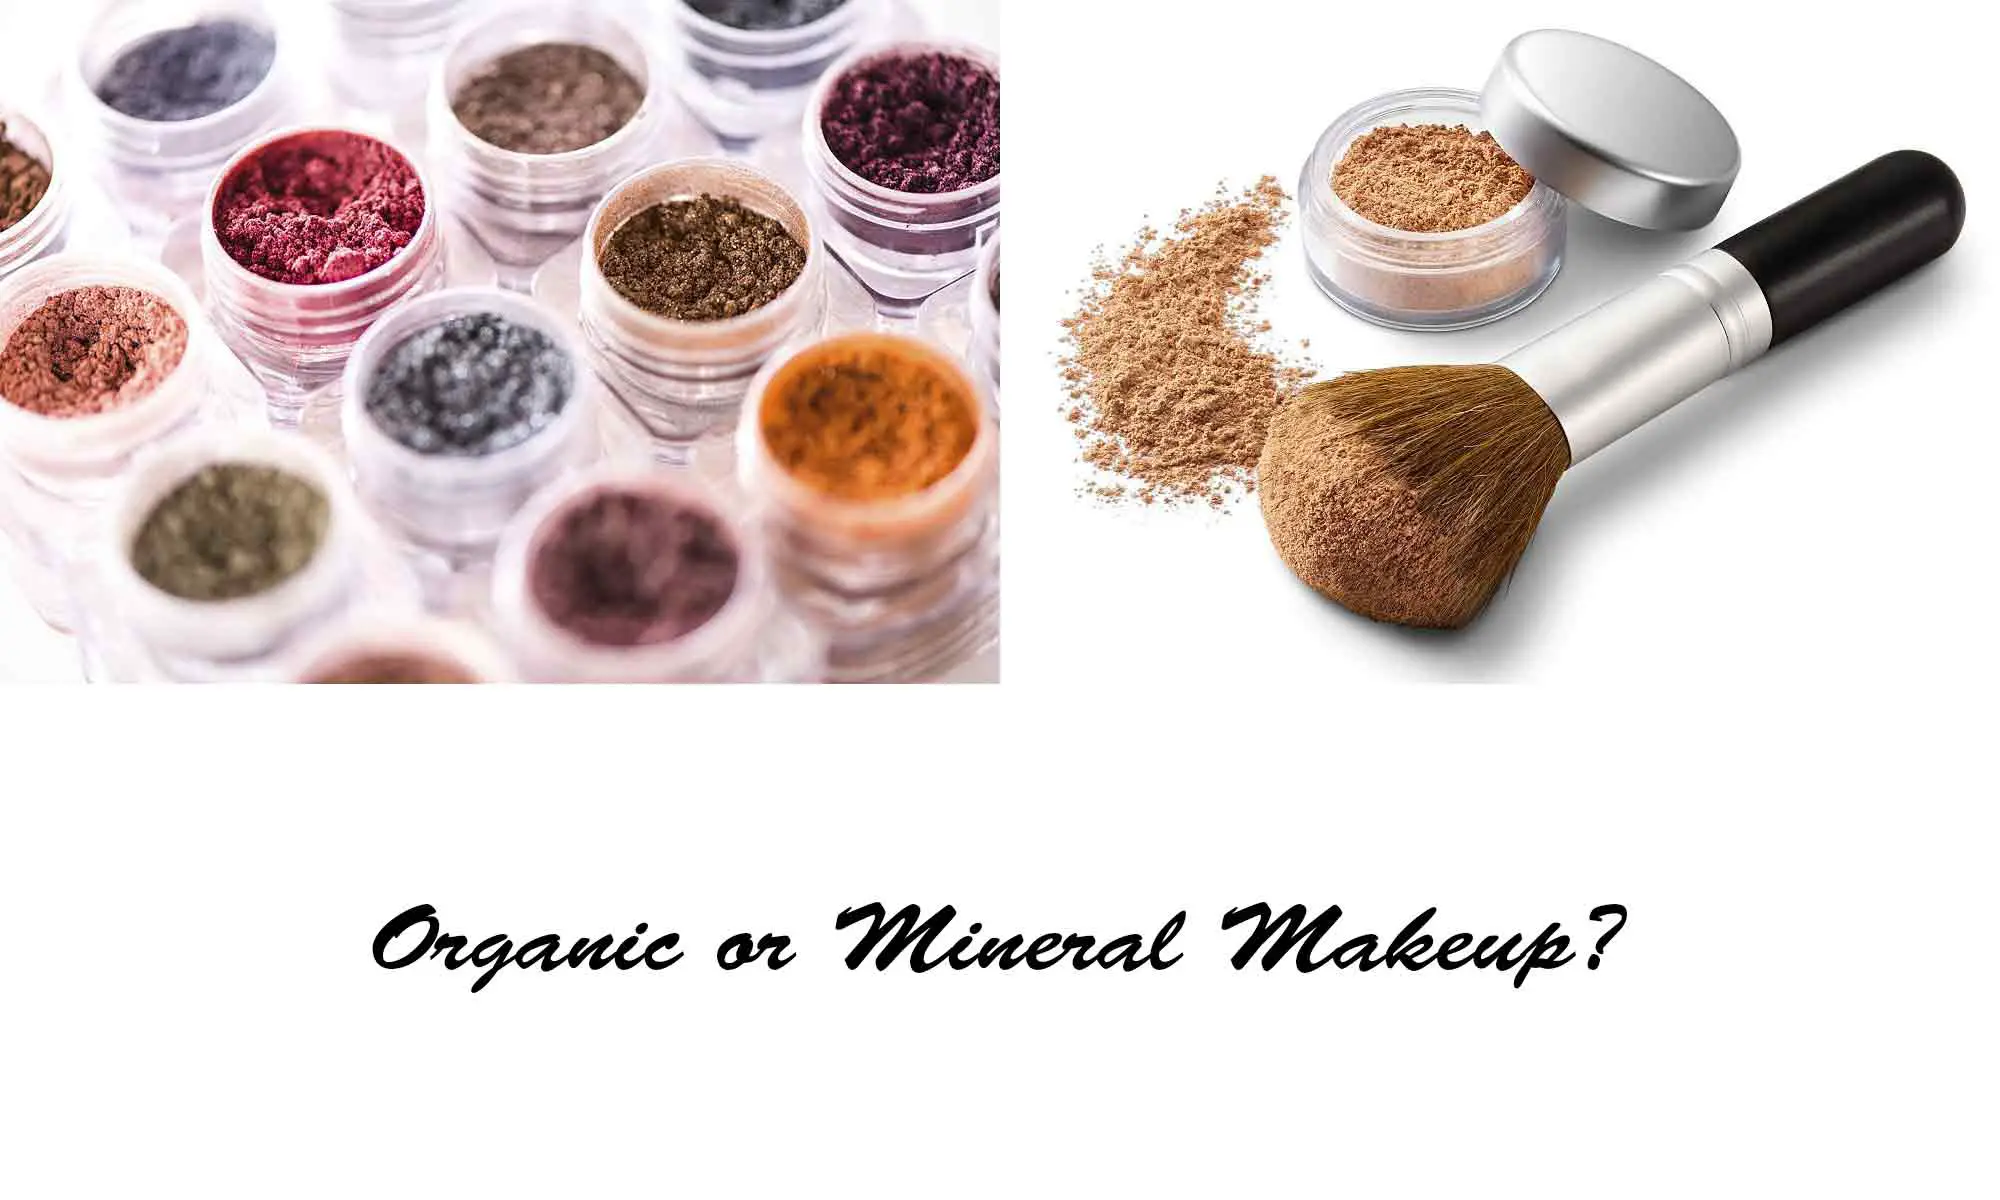 Organic and mineral makeup have different components